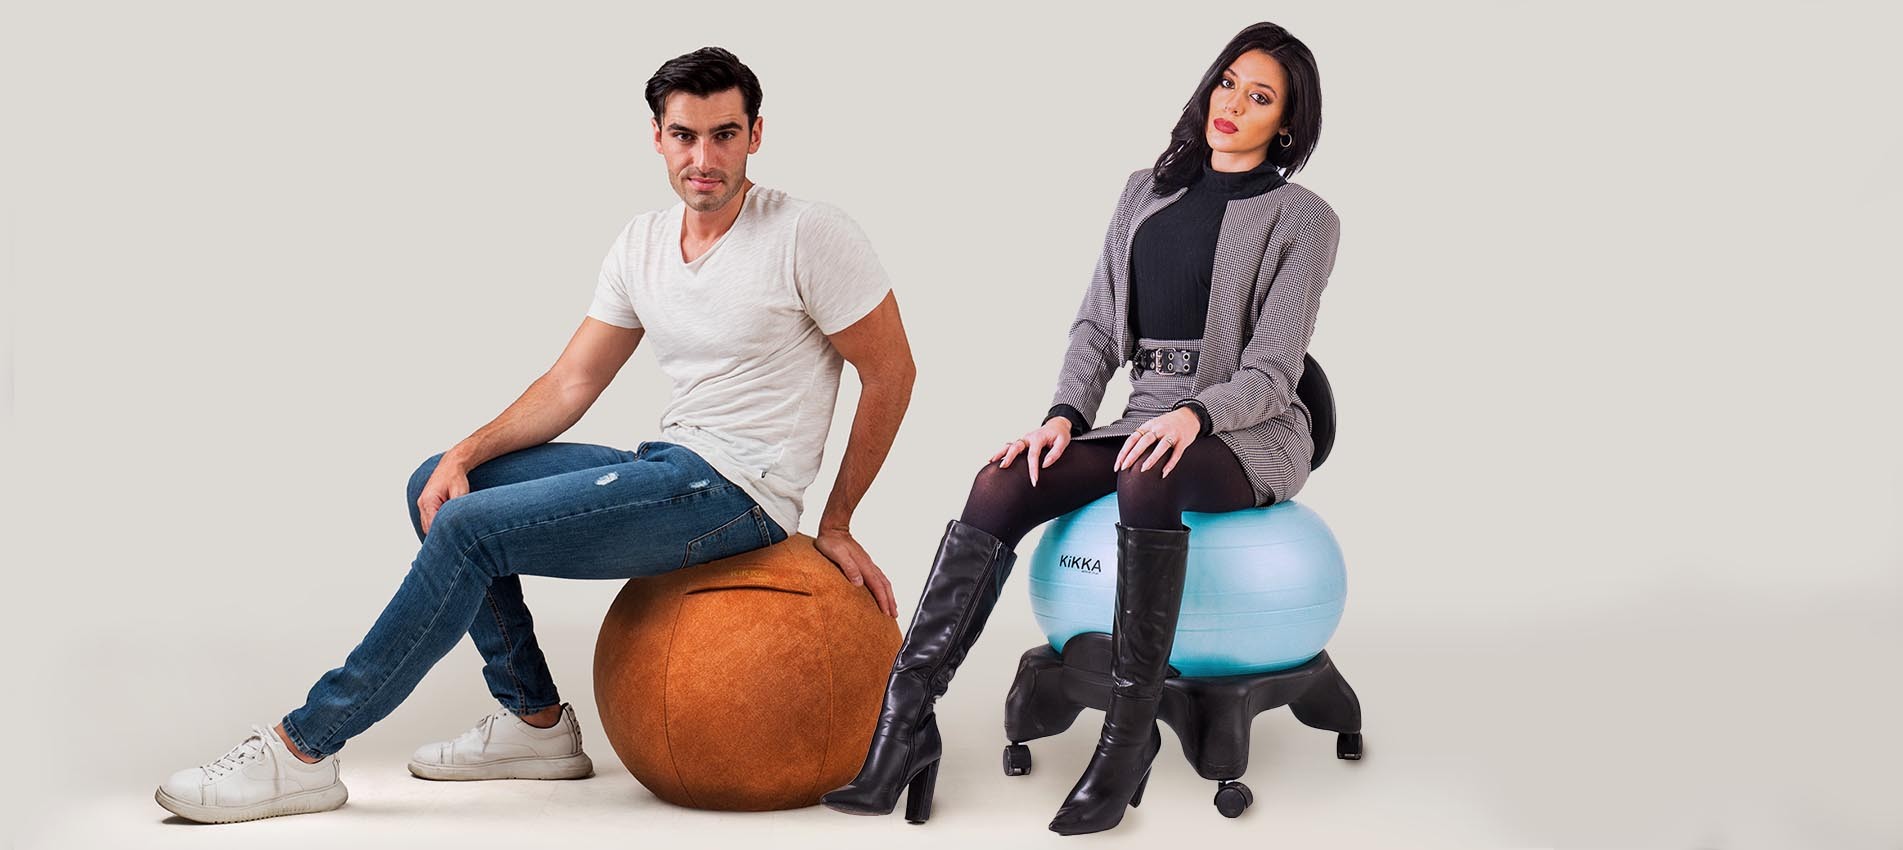 The ergonomic chair with inflatable ball